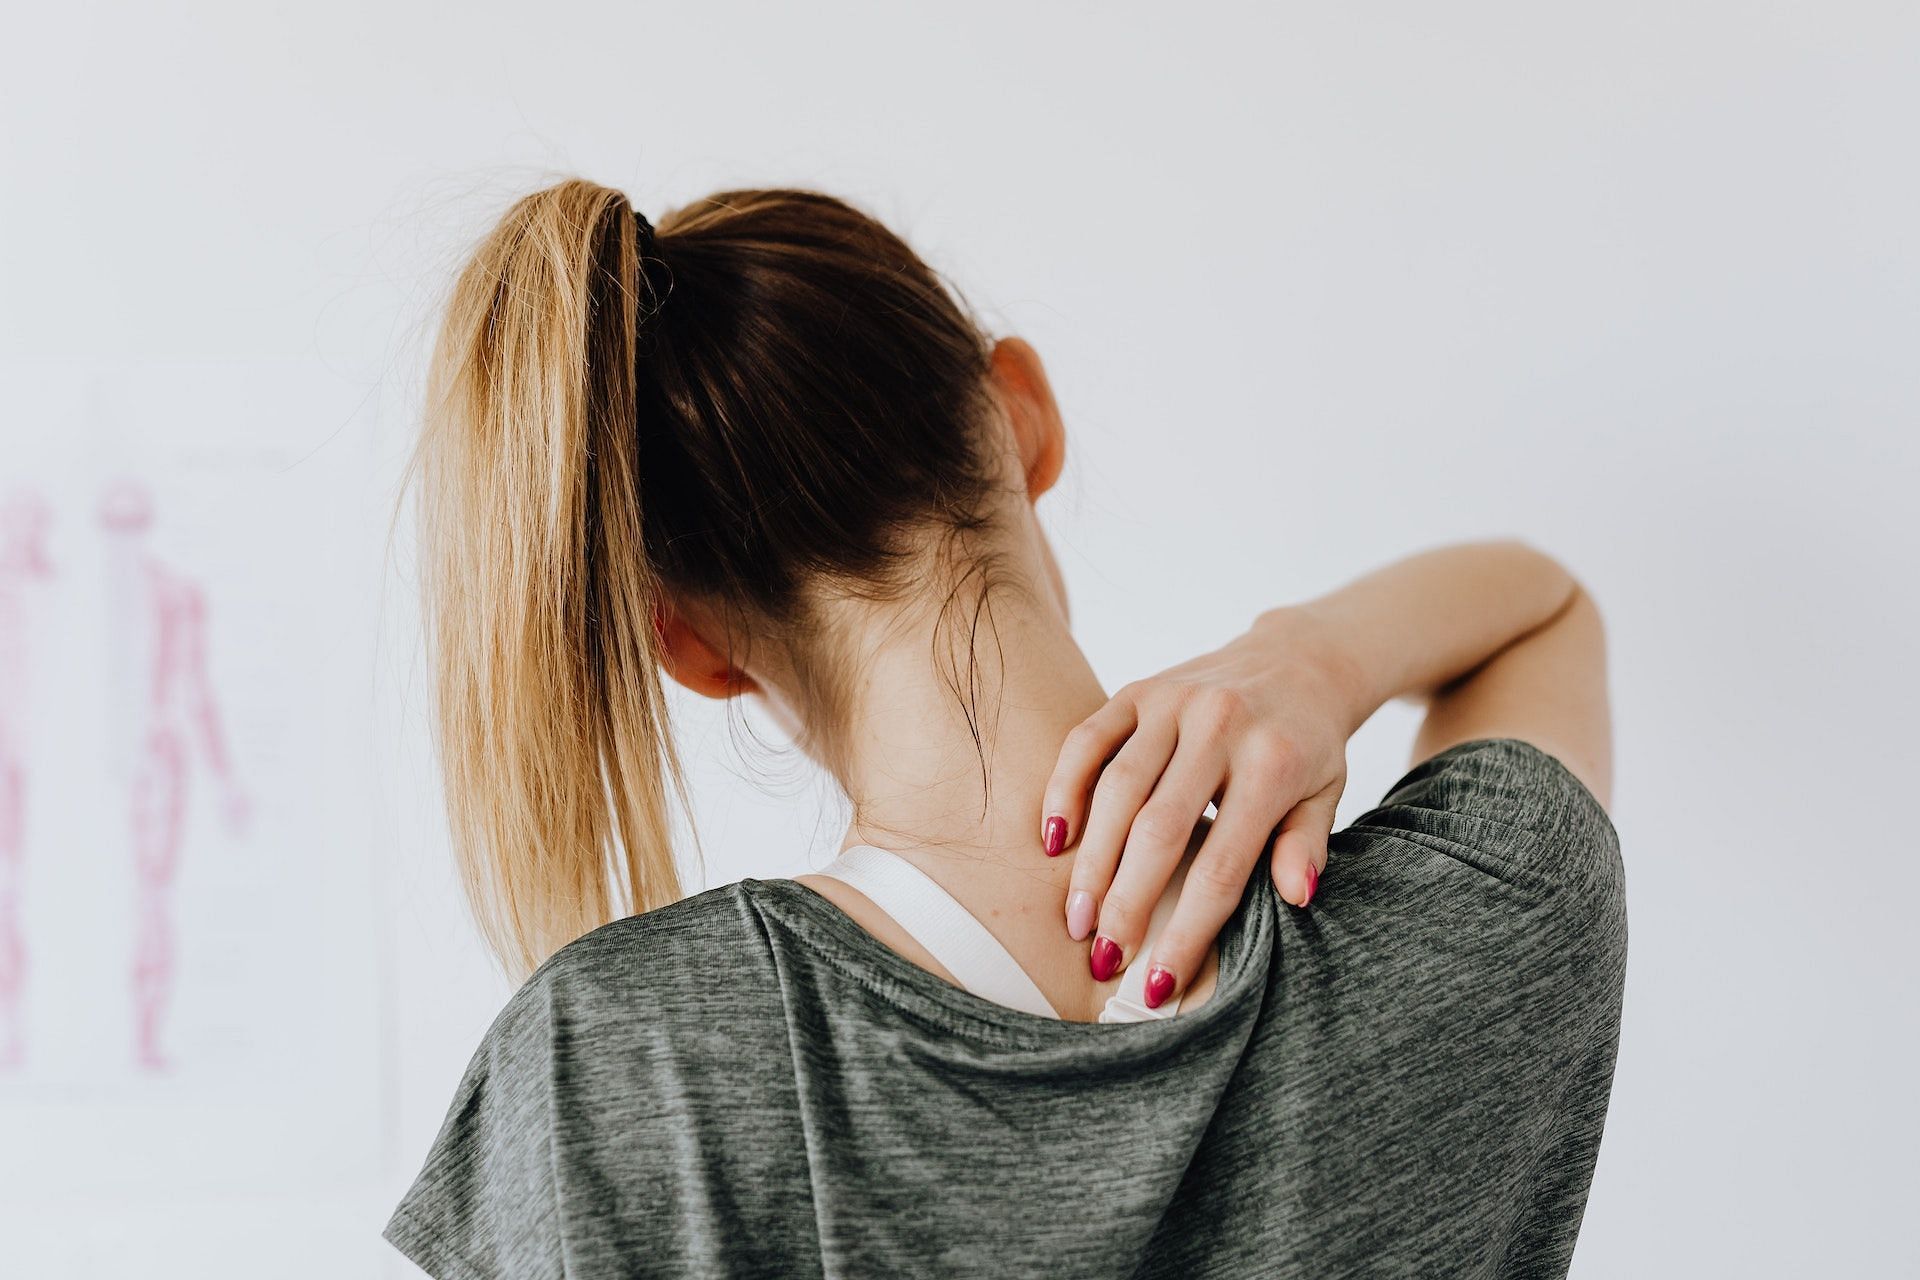 It is a pain that lasts for 3 to 6 months, or more. (Photo via Pexels/Karolina Grabowska)